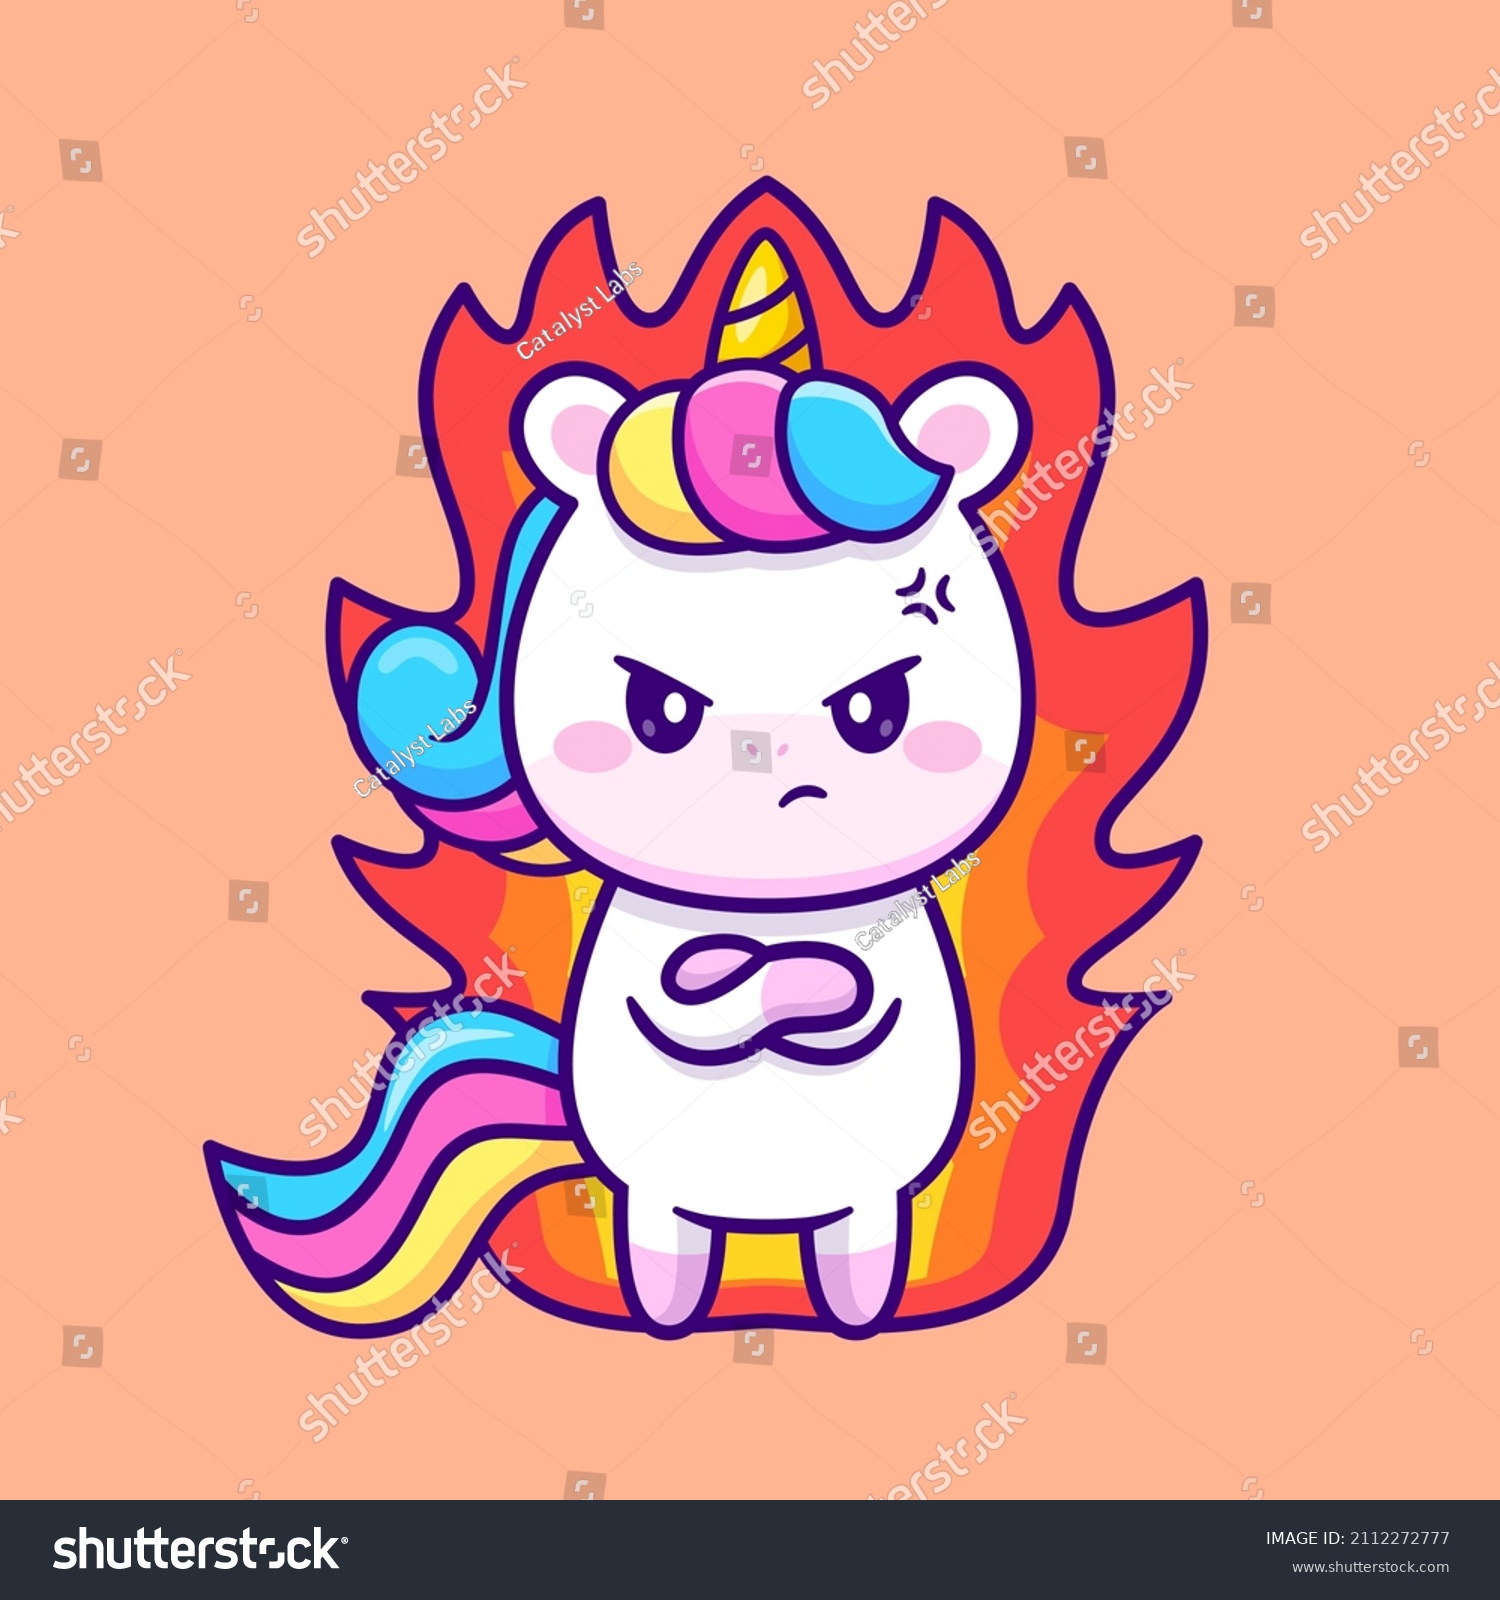 SVG of Cute Unicorn Angry Cartoon Vector Icon Illustration. Animal Nature Icon Concept Isolated Premium Vector. Flat Cartoon Style svg